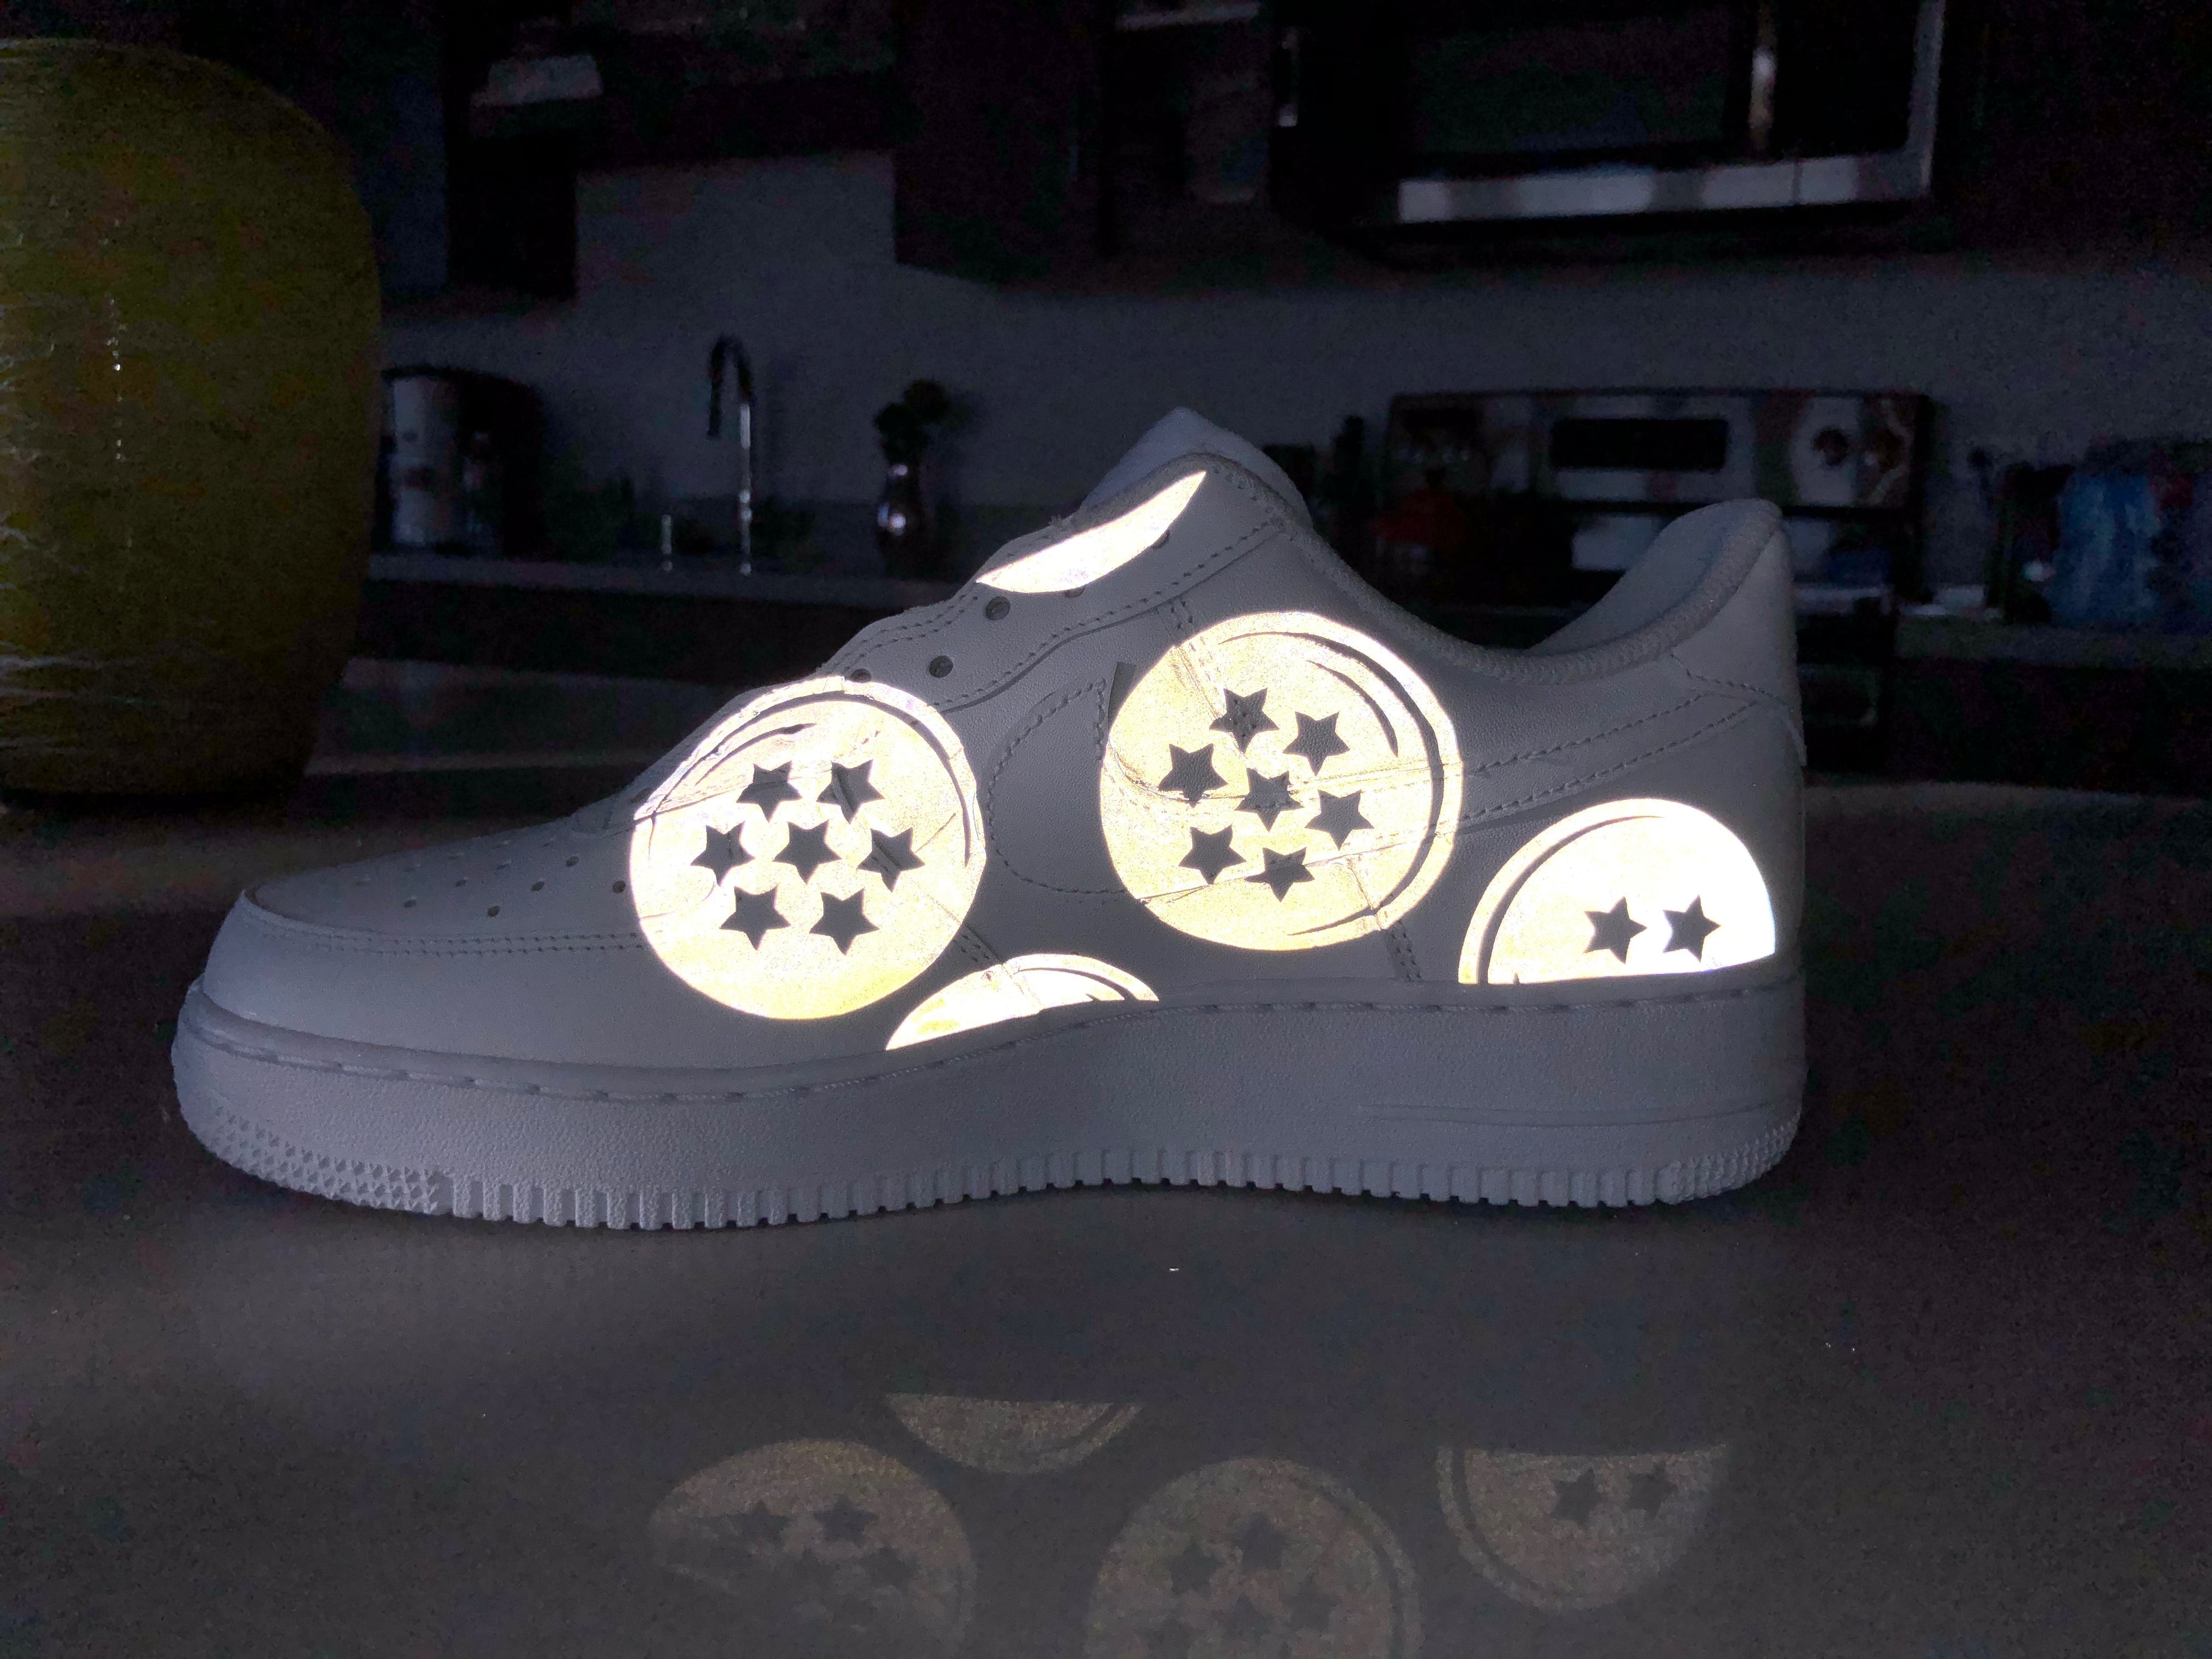 3m reflective butterfly stickers for shoes